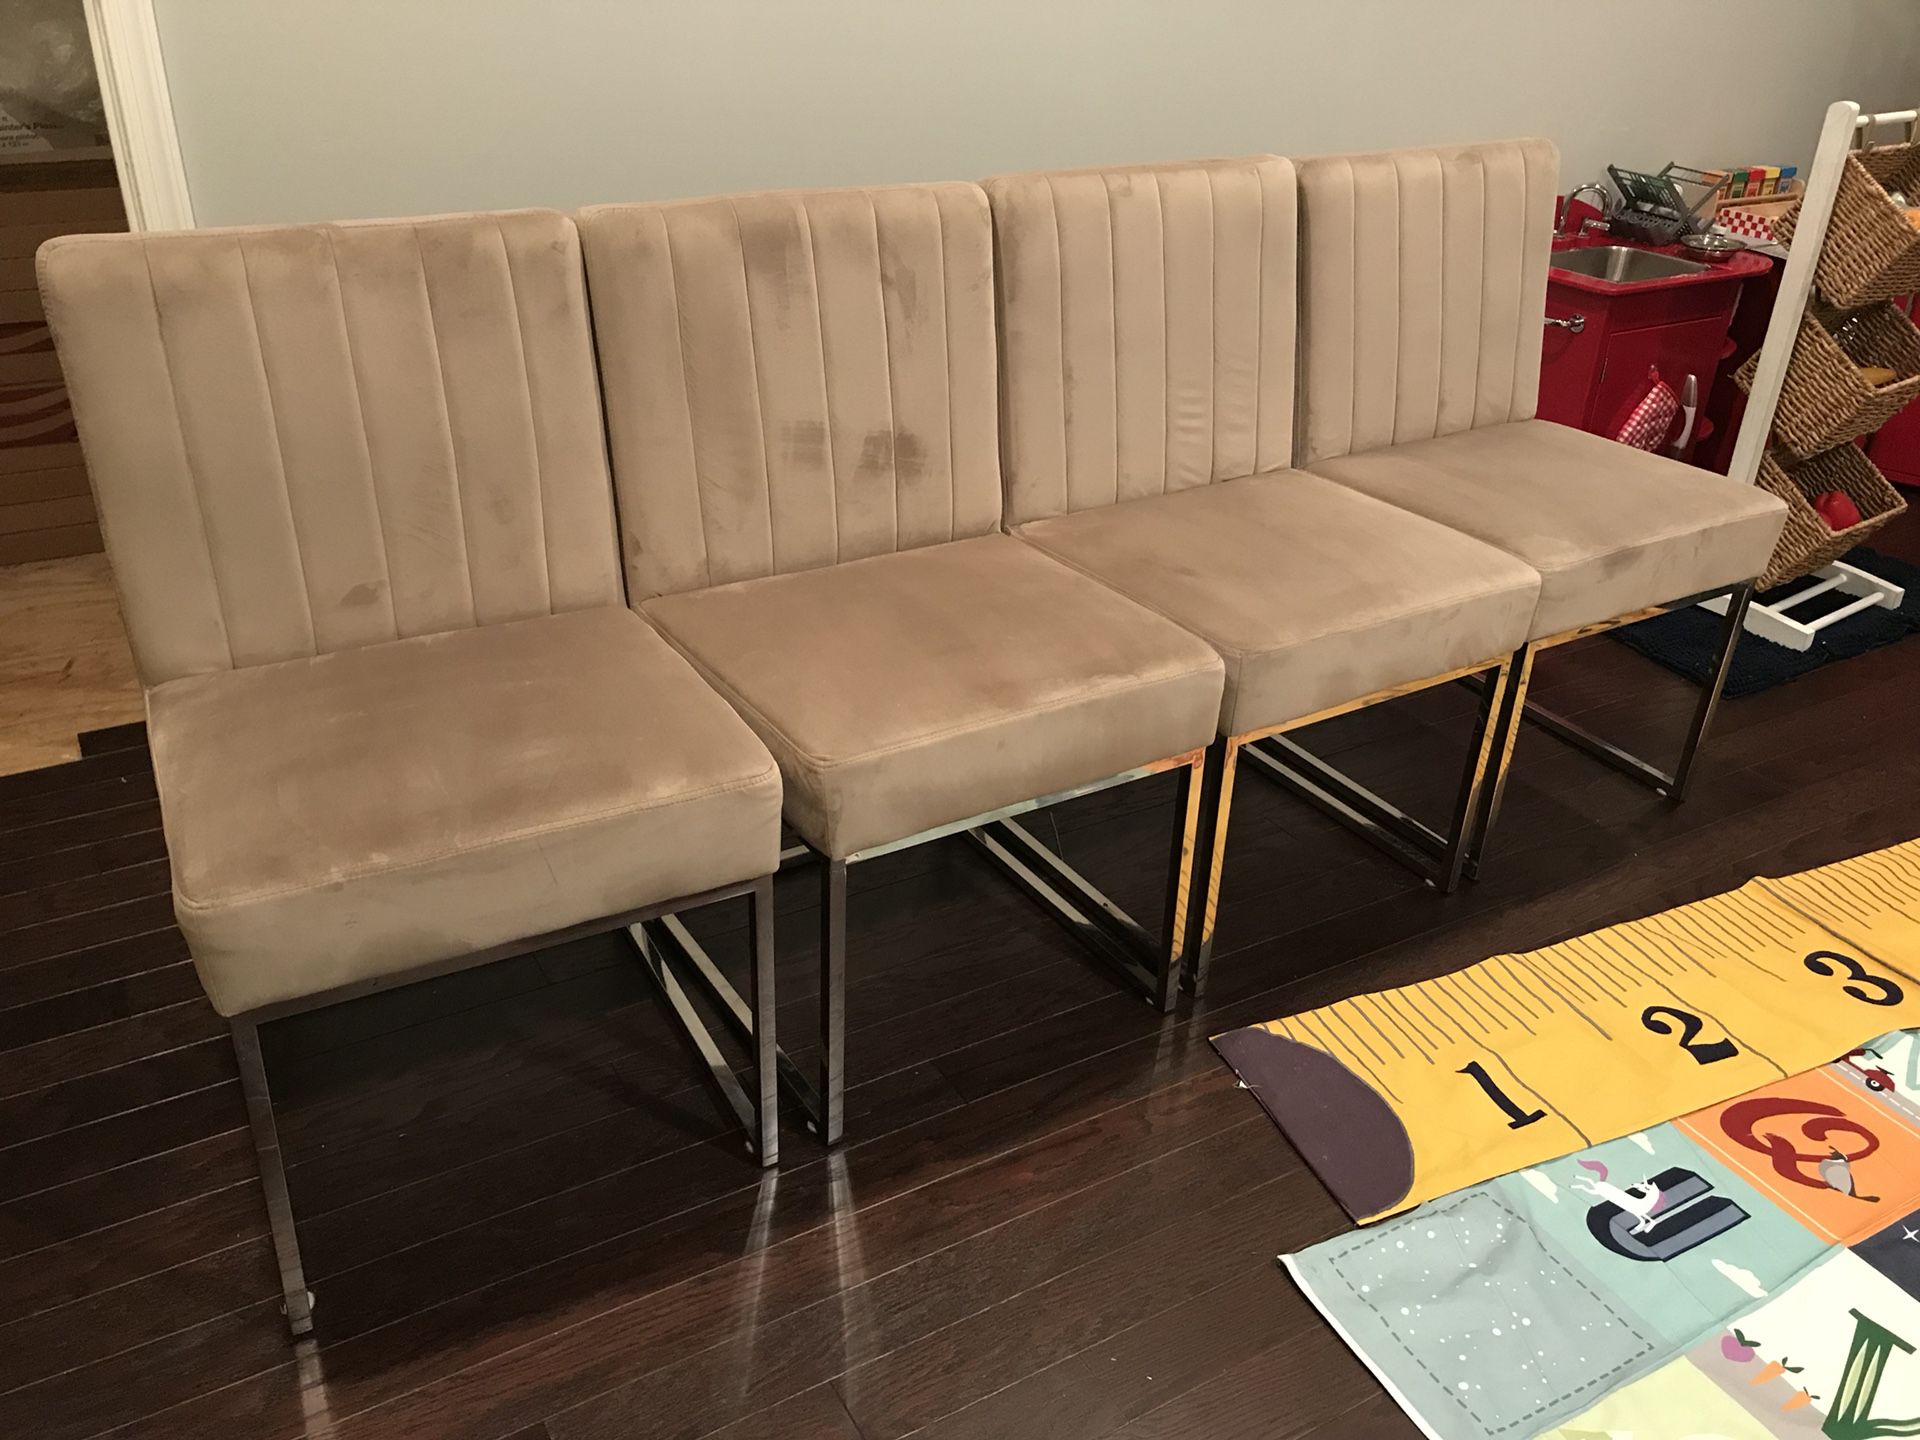 Velvet/suede dining chairs with chrome legs